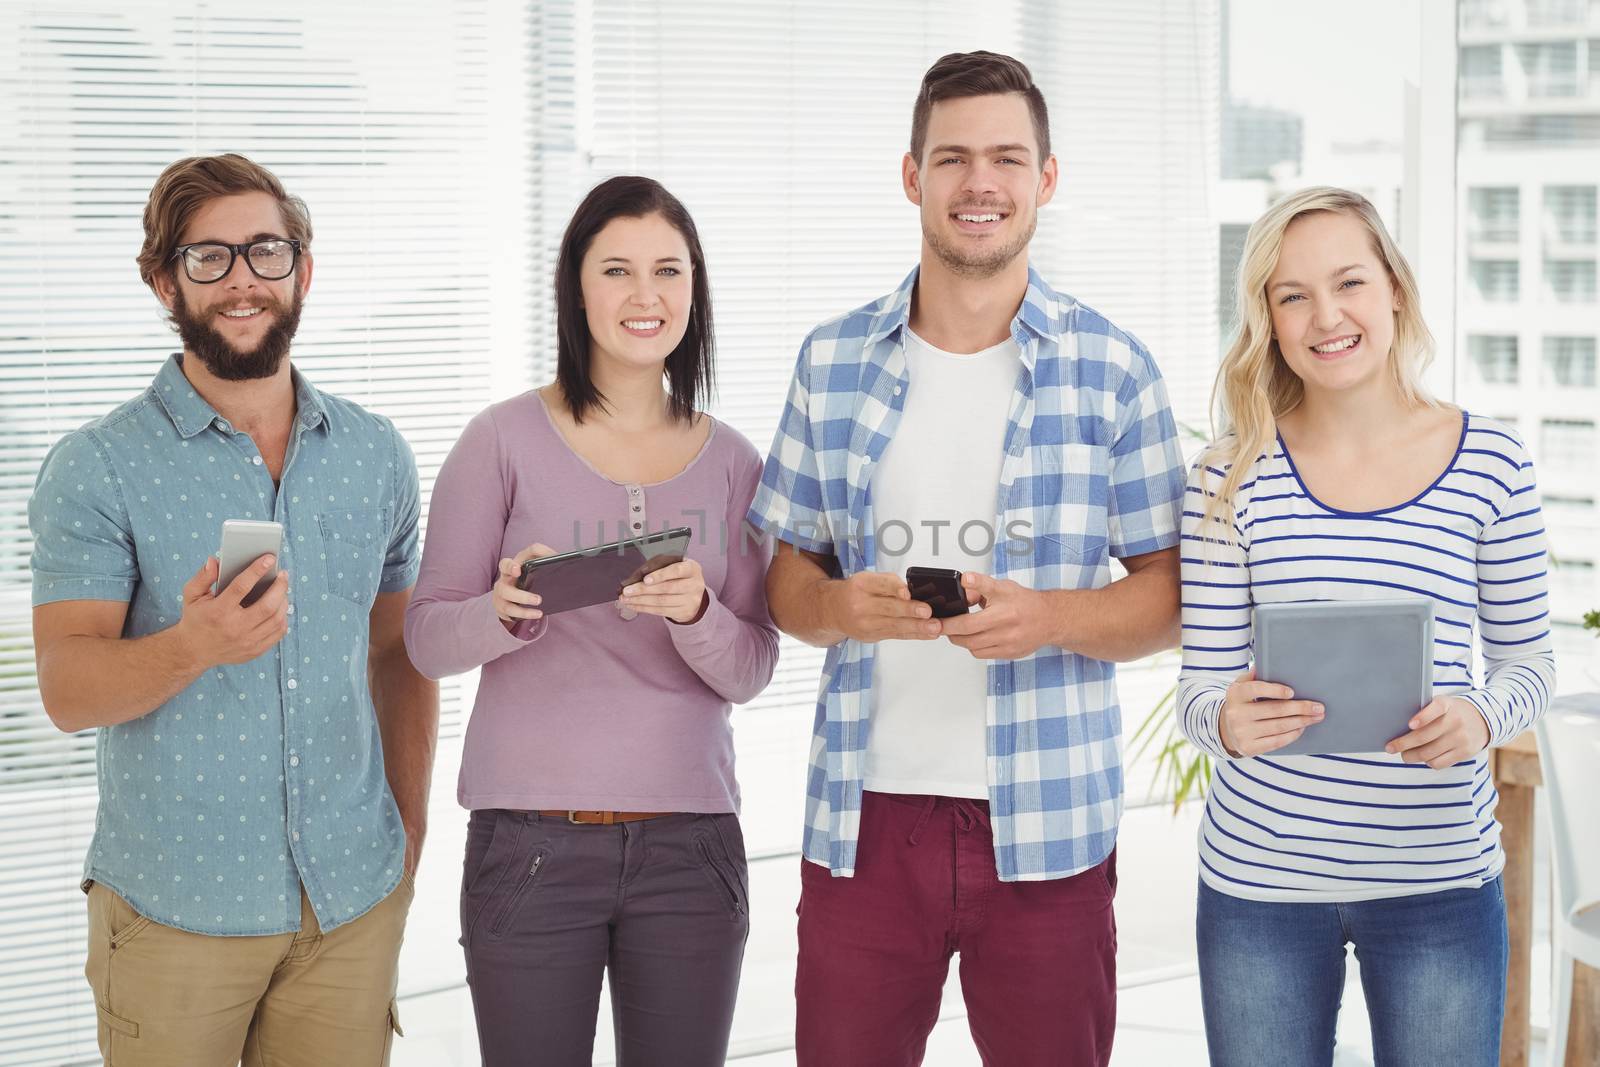 Portrait of smiling business people using electronic gadgets while standing at office